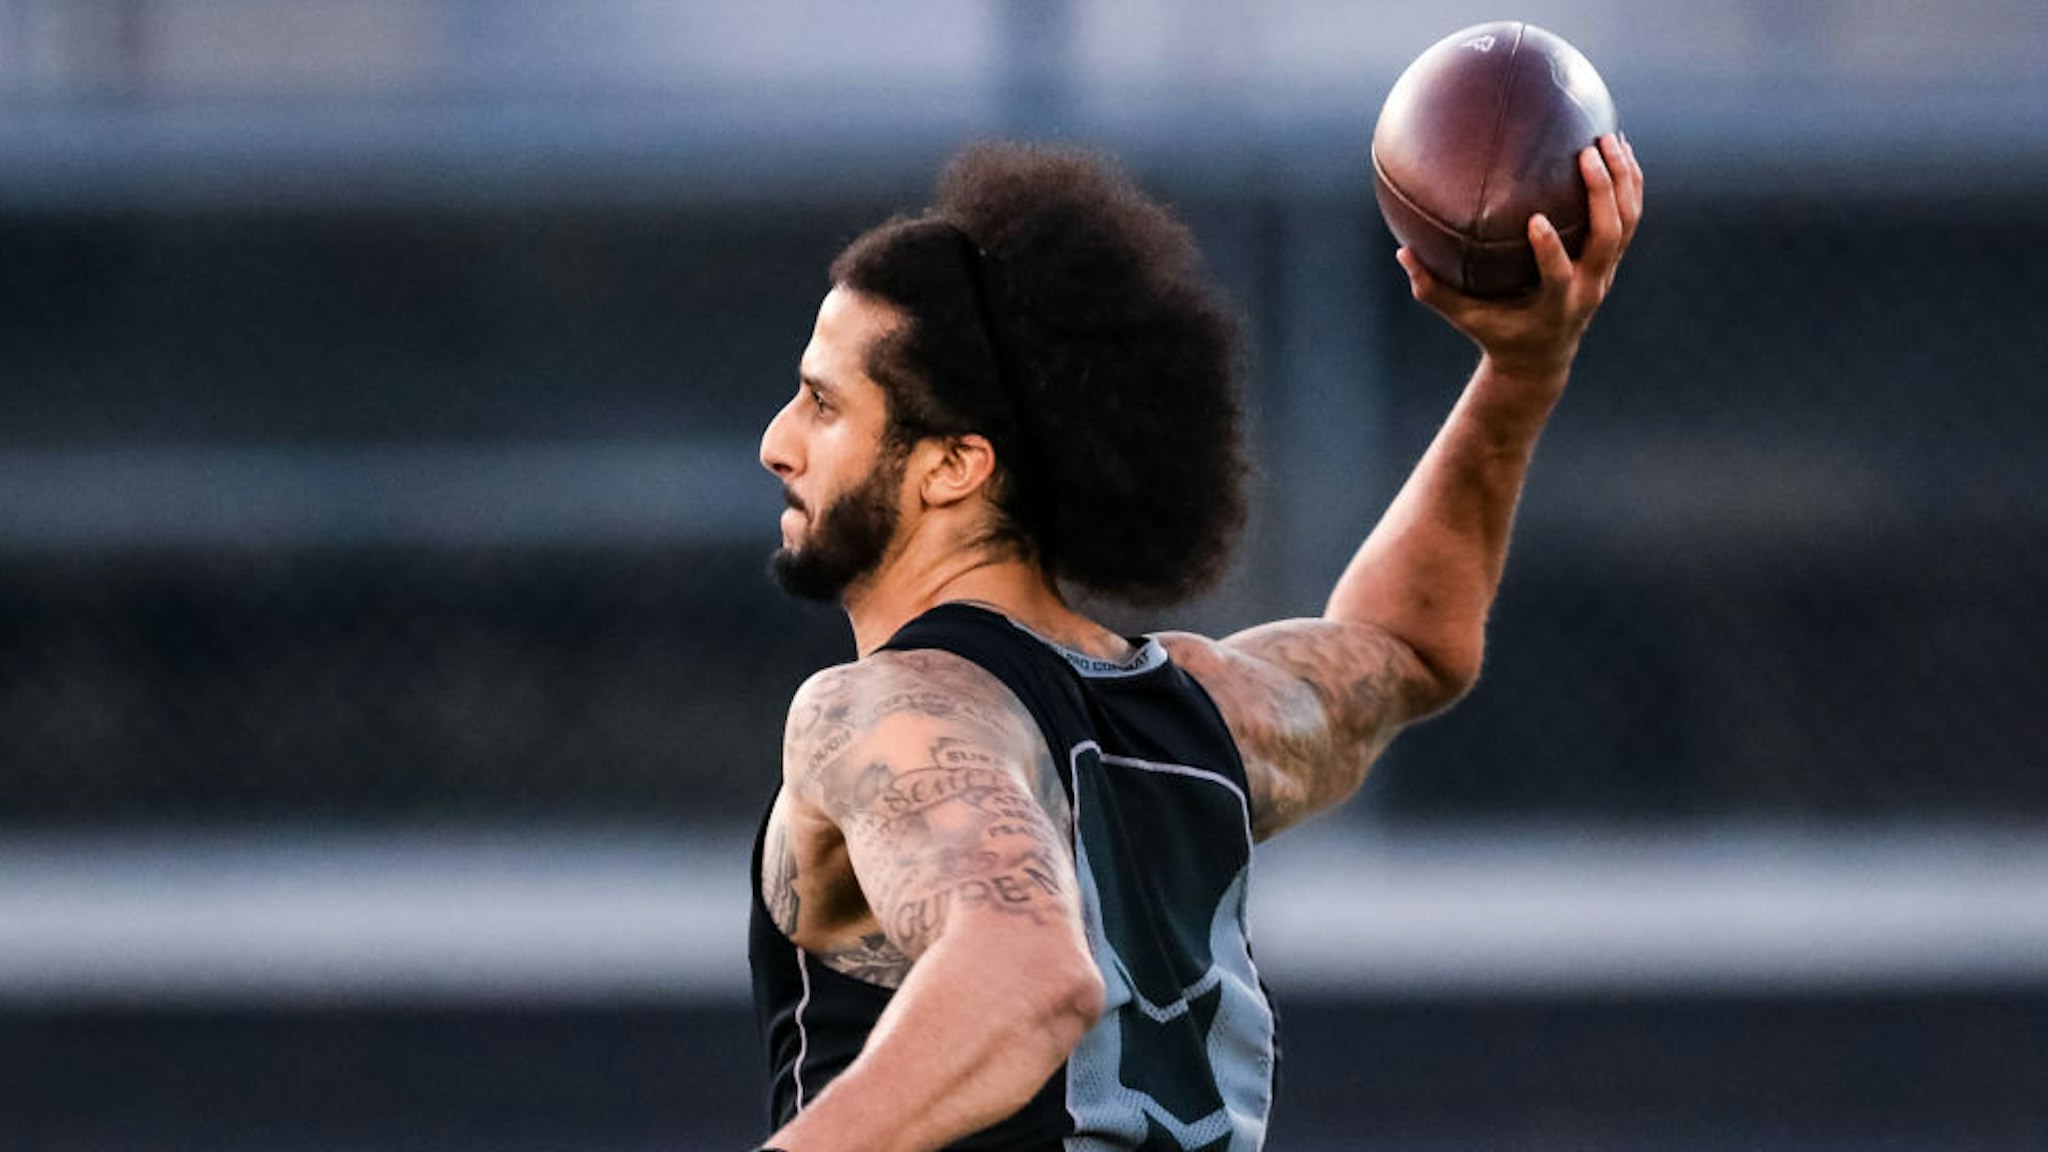 Colin Kaepernick looks to pass during his NFL workout held at Charles R Drew high school on November 16, 2019 in Riverdale, Georgia. (Photo by Carmen Mandato/Getty Images)